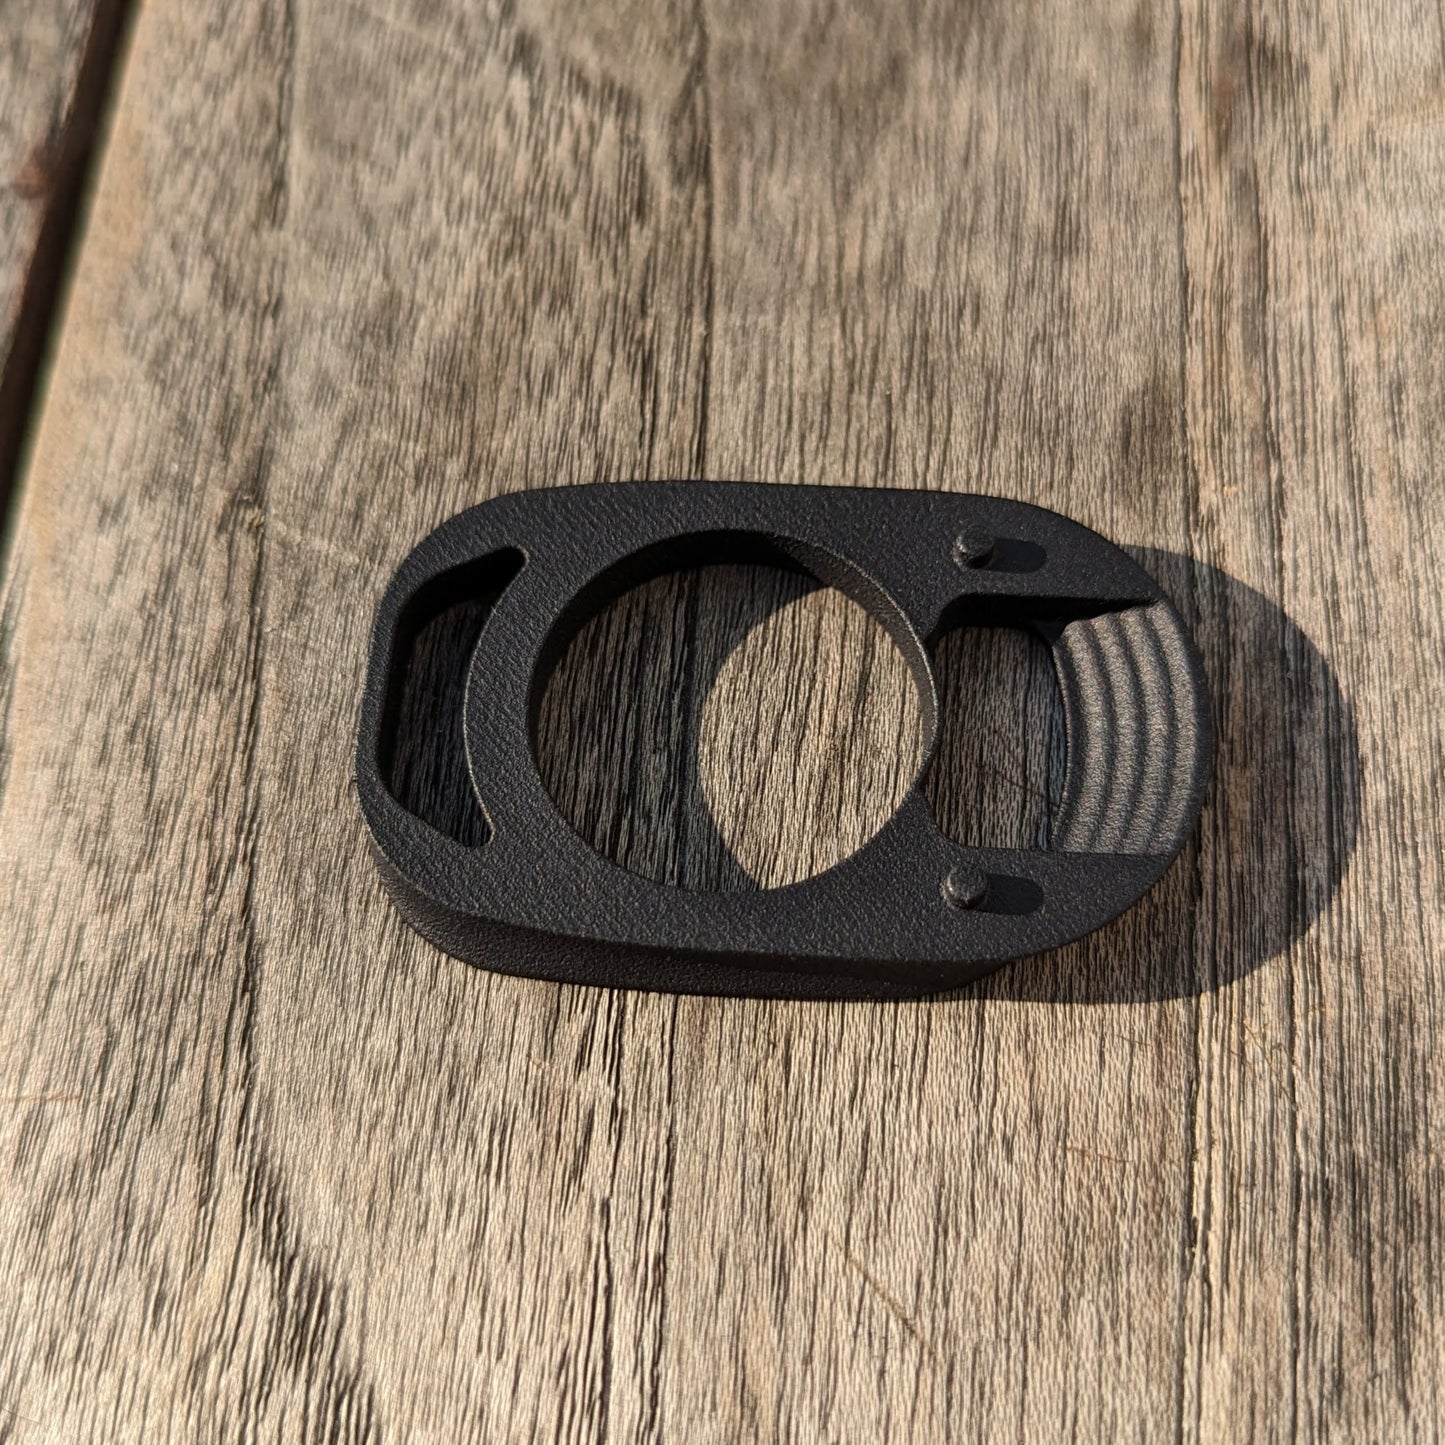 Transition Spacers / Adapters for FSA NS ACR or Vision SMR Stems |